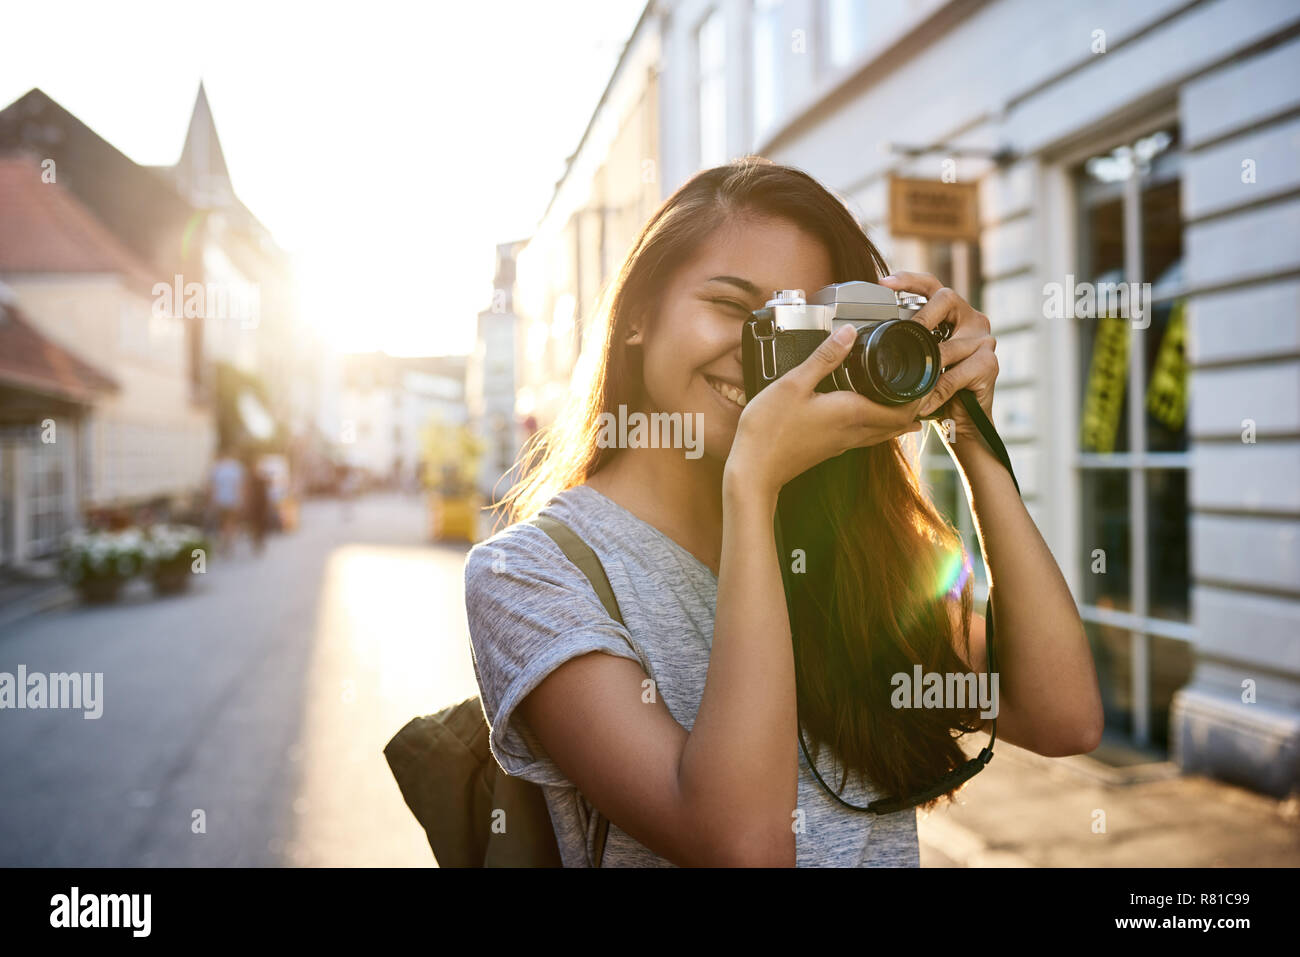 Smiling young Asian woman taking photos in the city Stock Photo